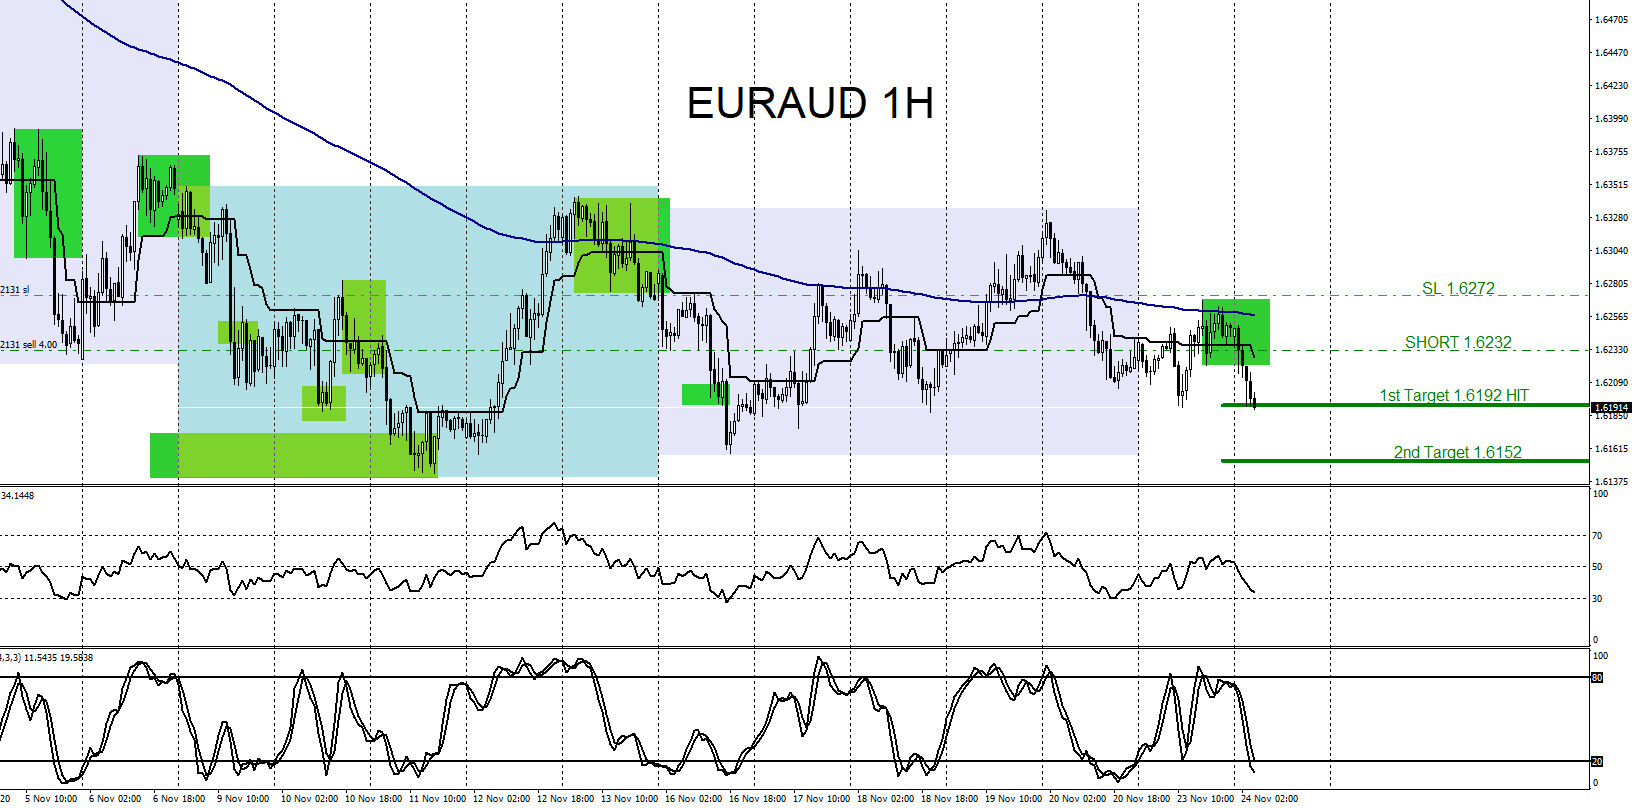 EURAUD : Trading with the Trend